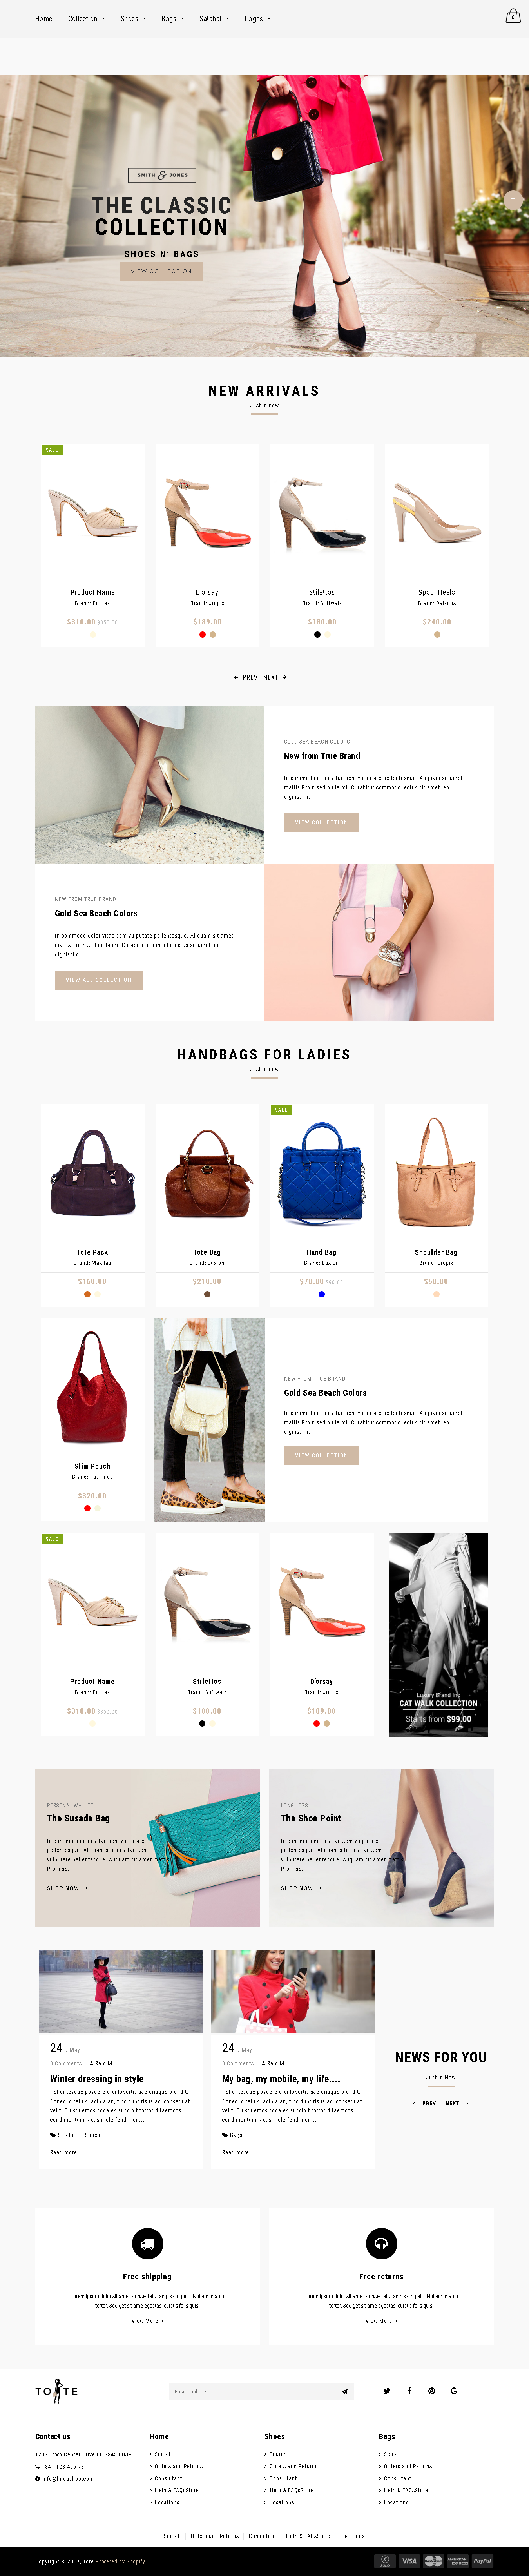 5 Best SHOPIFY Premium Themes Collection for Handbags Store 2017 - Tote - Shoes and Bags Shopify theme